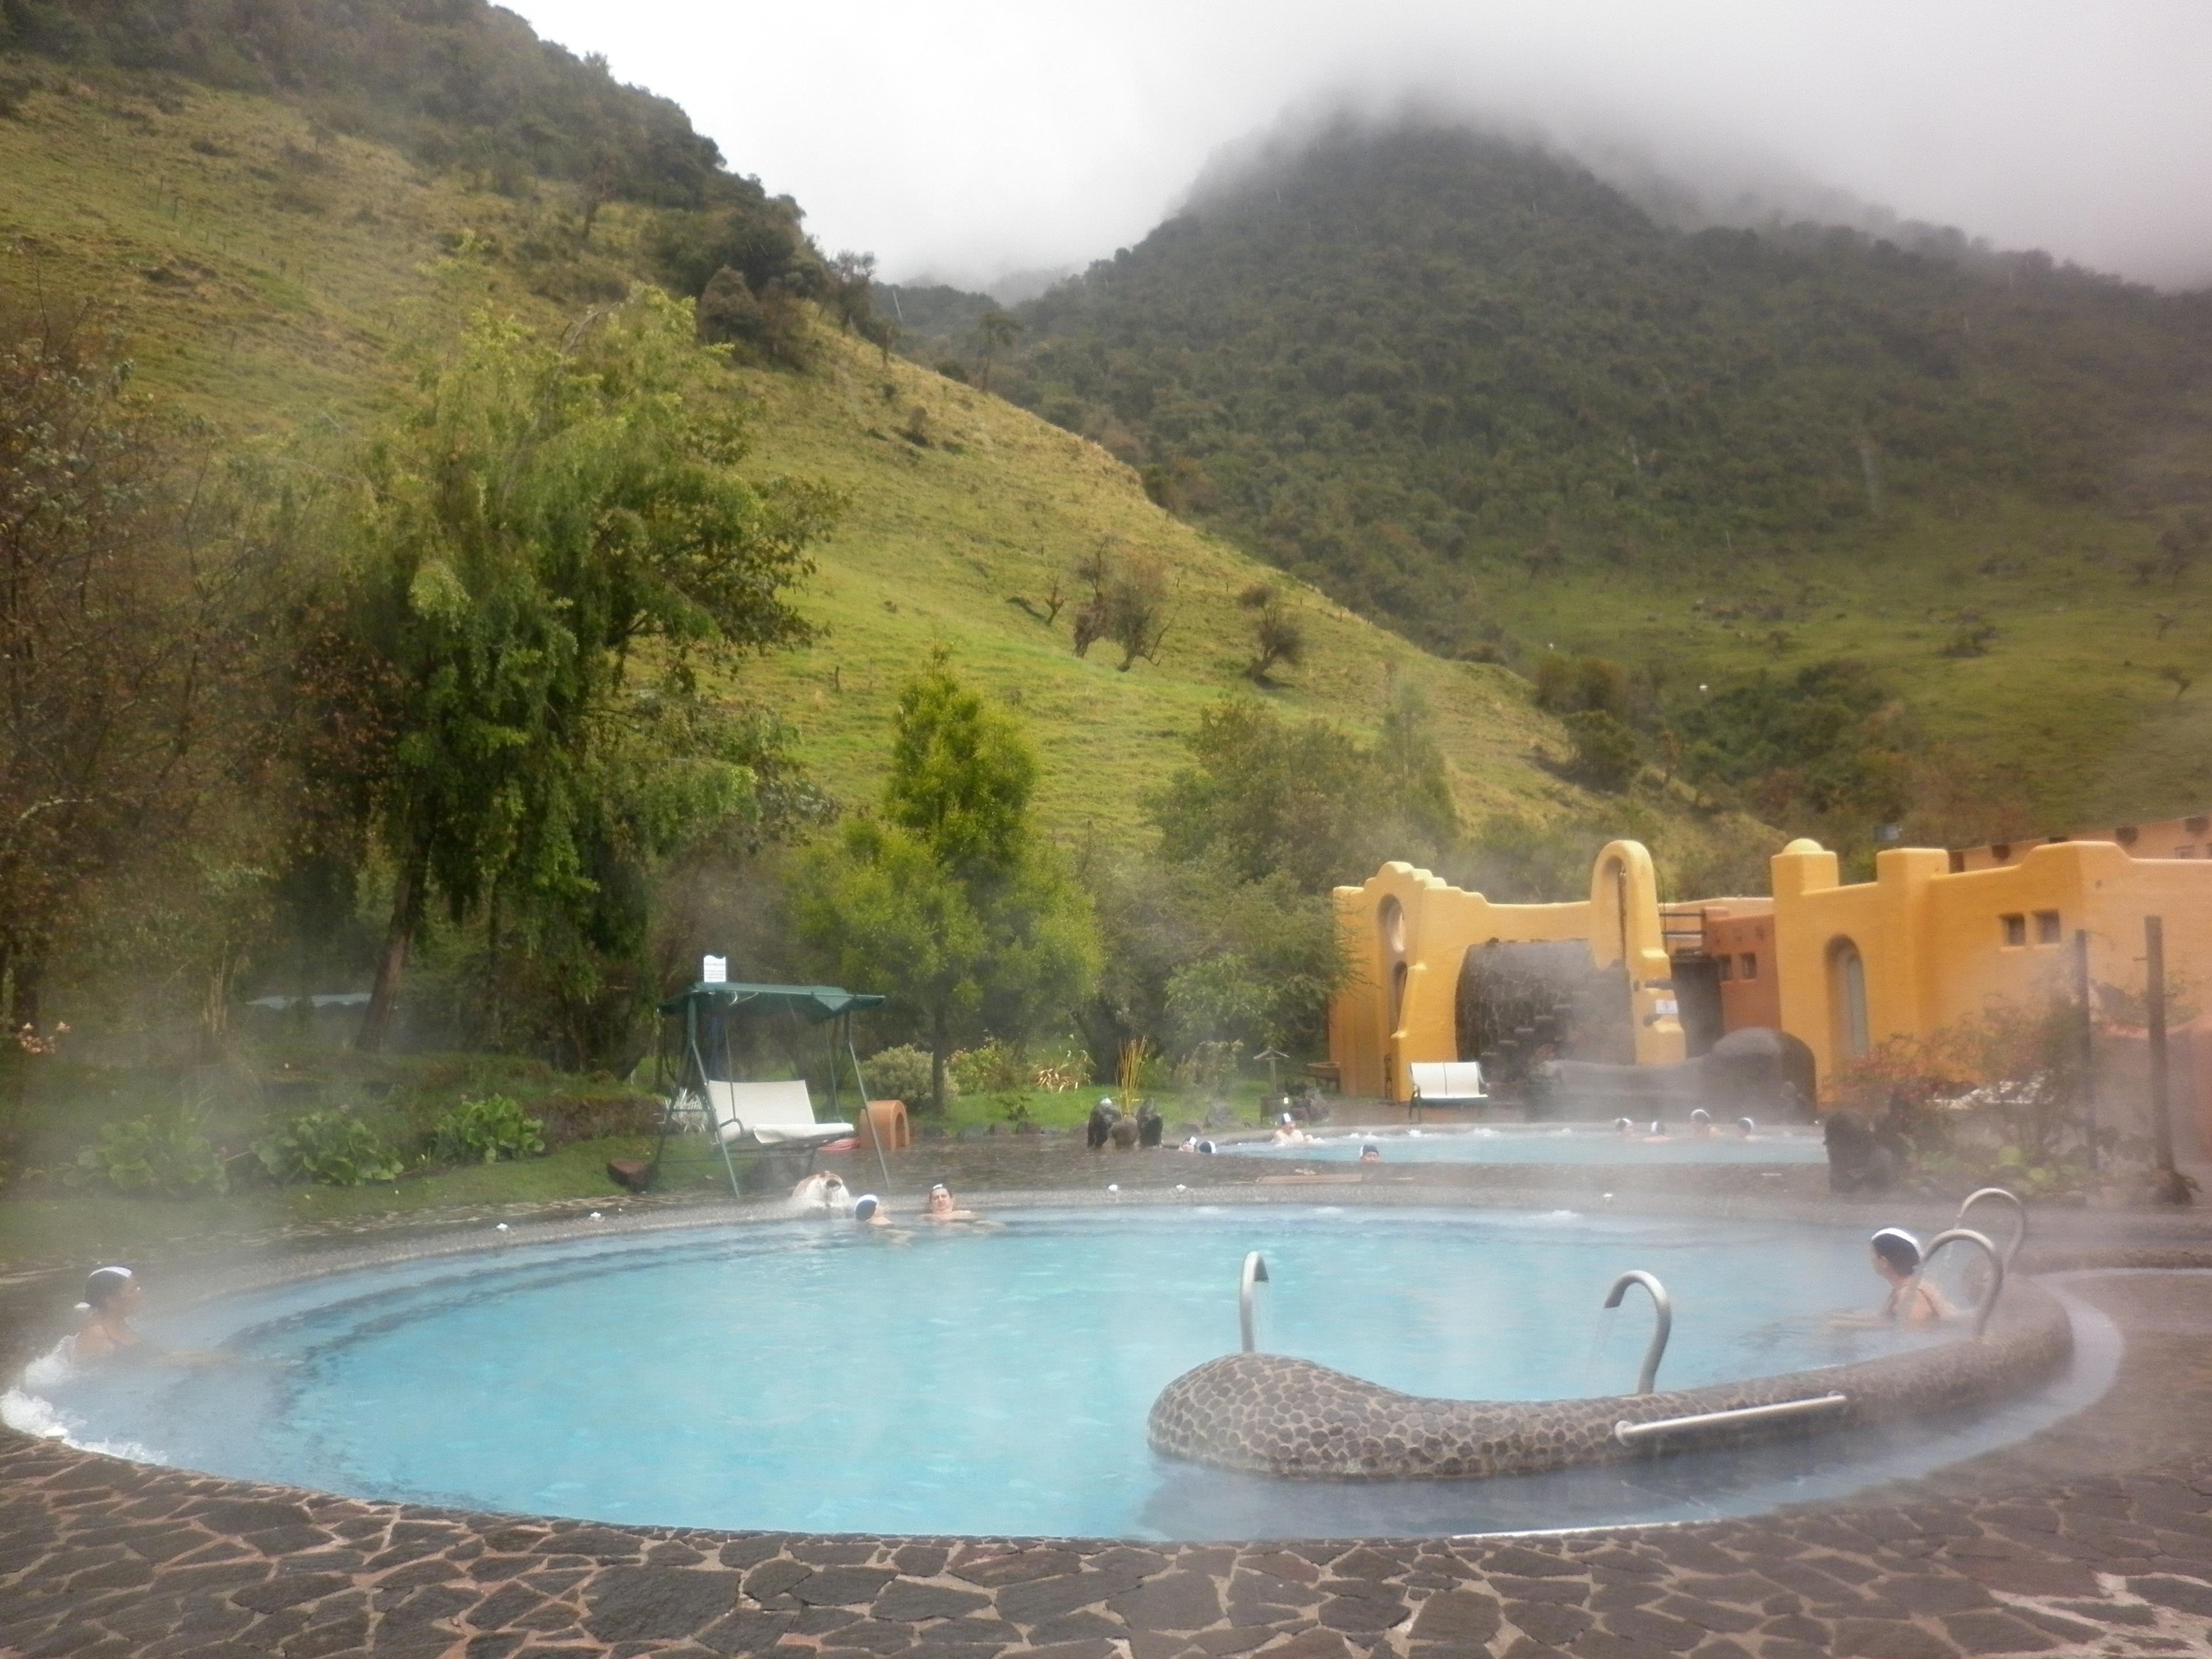 Cover image of this place Papallacta Thermal Baths